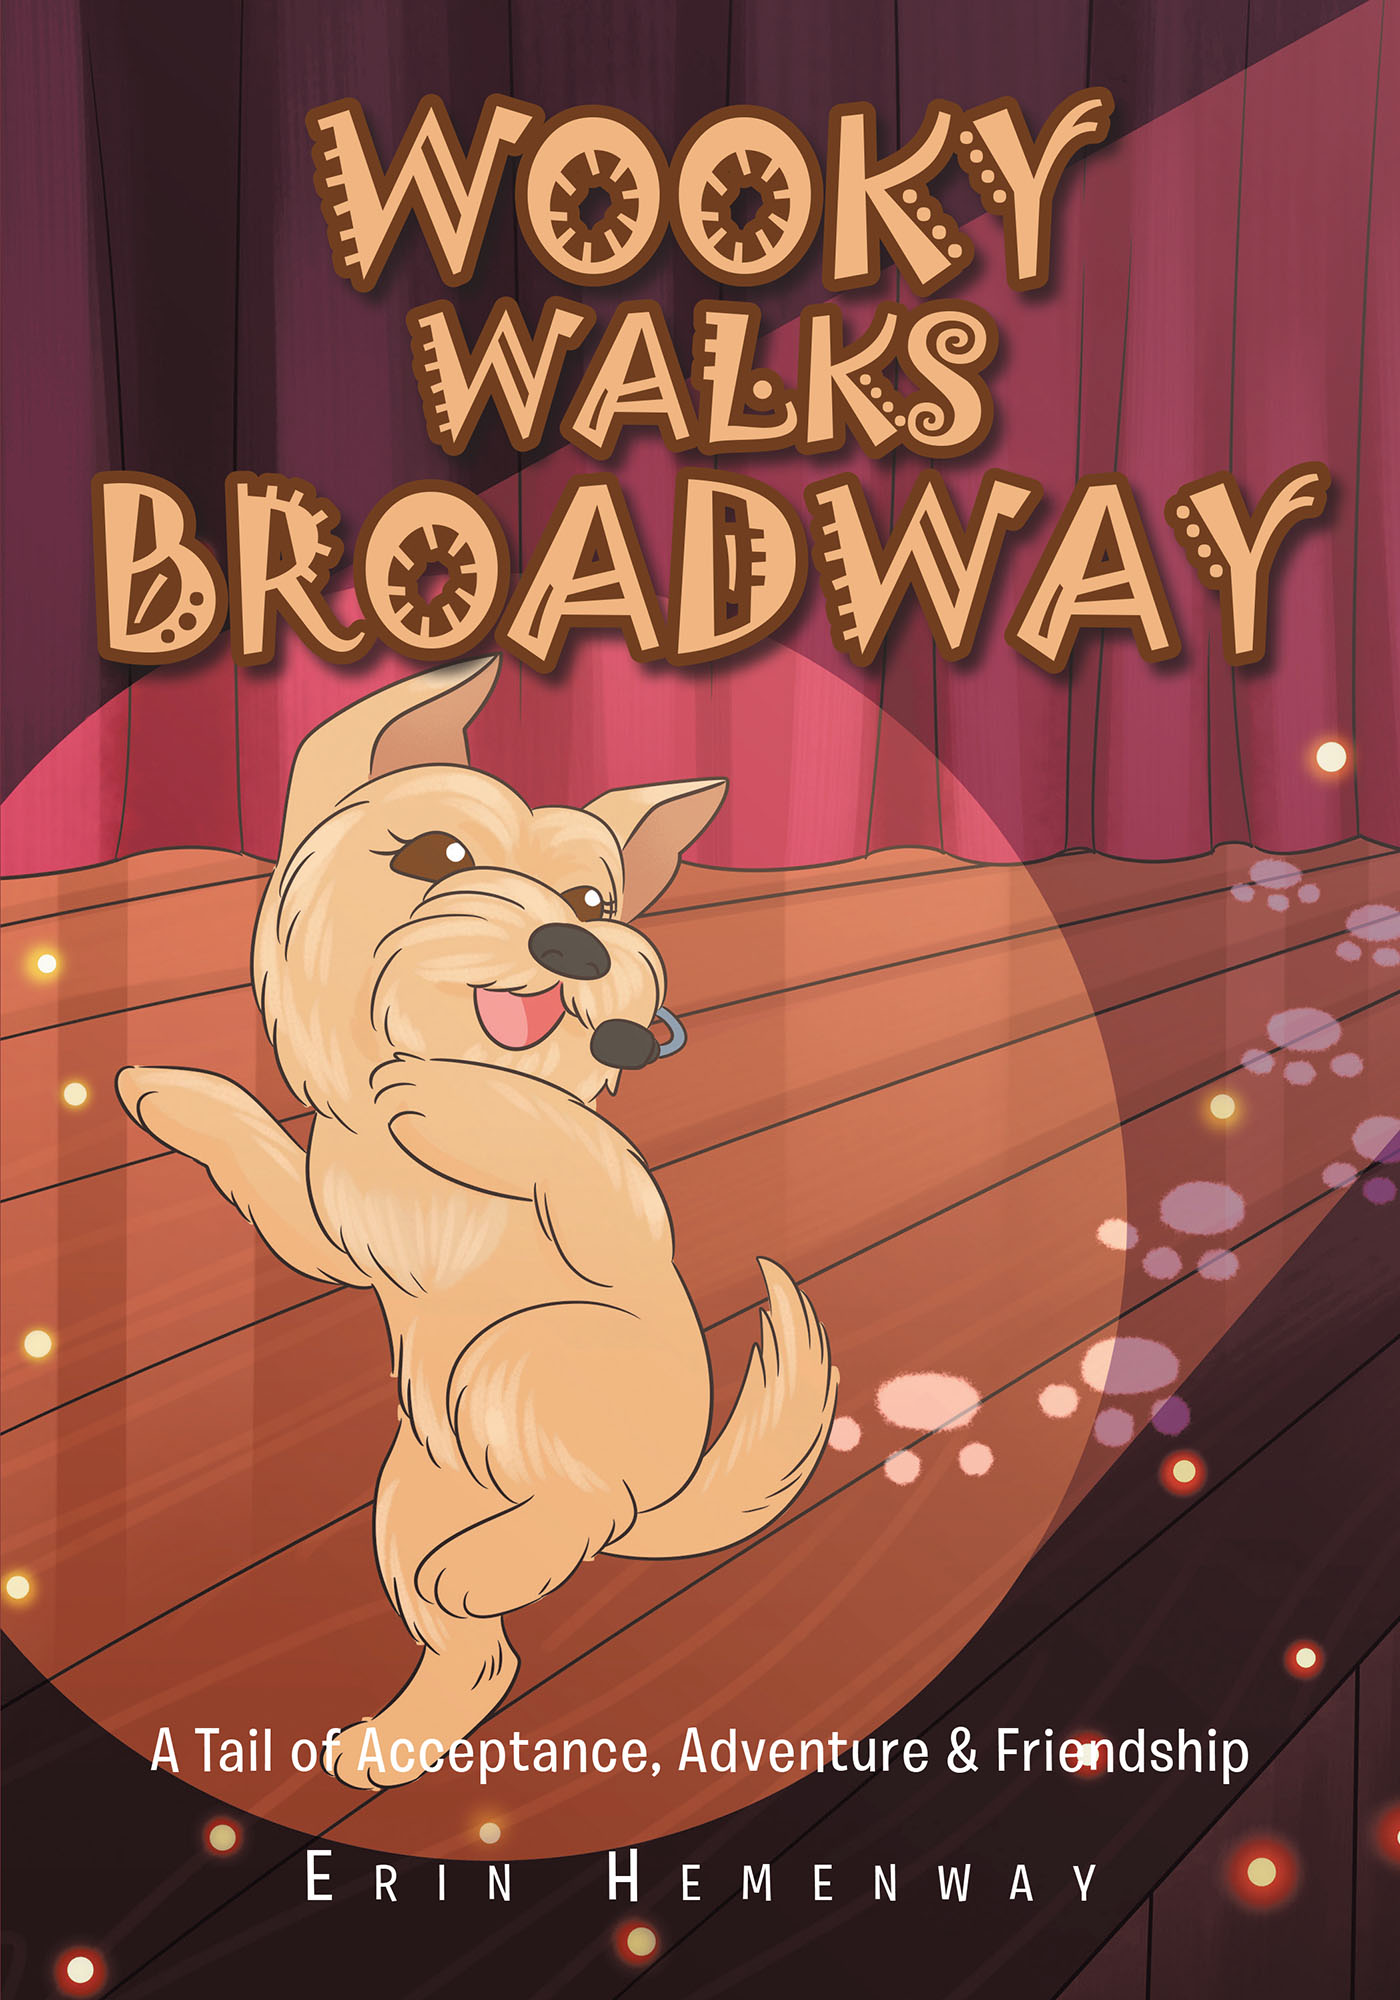 Erin Hemenway’s Newly Released "Wooky Walks Broadway: A Tail of Acceptance, Adventure & Friendship" is an Entertaining Adventure in New York City